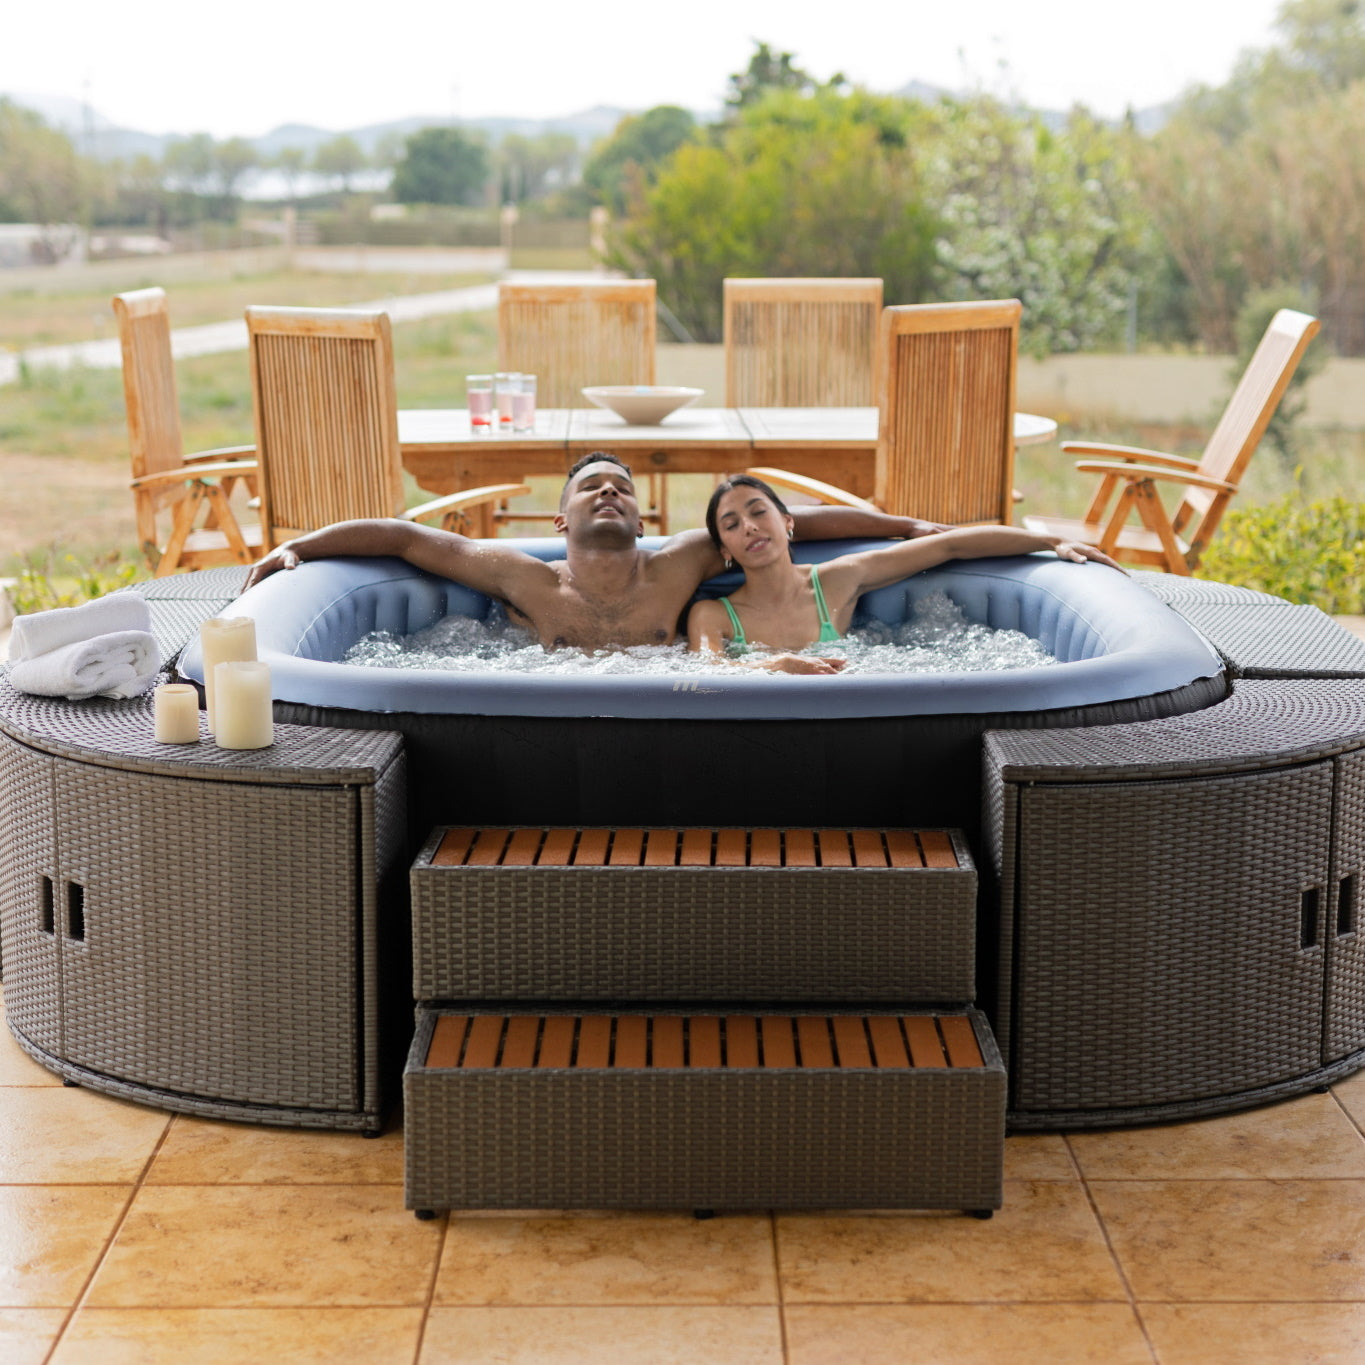 5 Reasons Why We Love Our Inflatable Spa